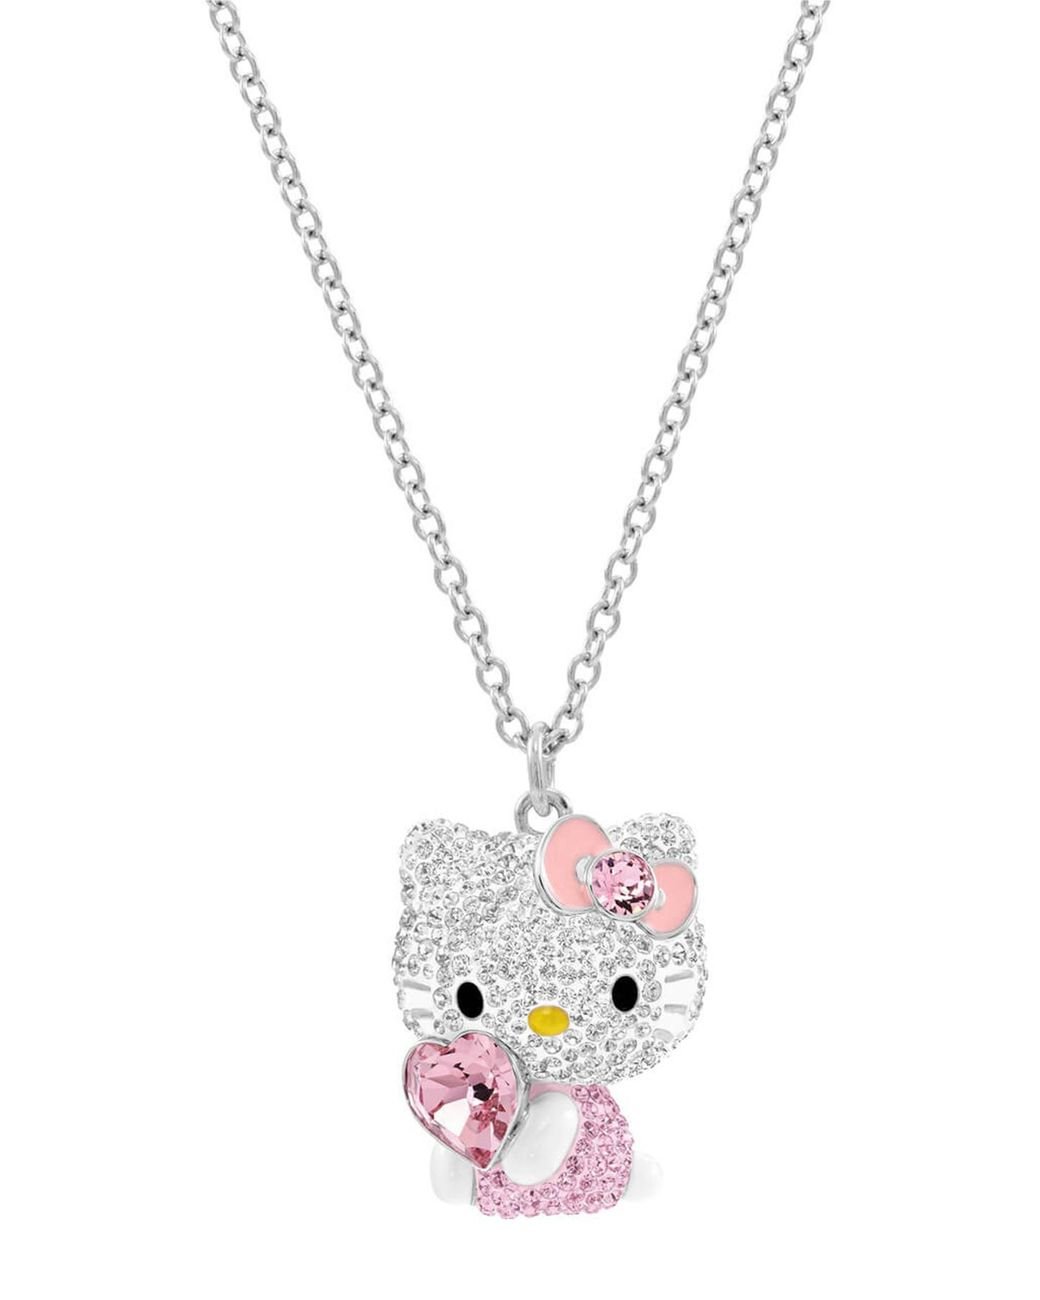 Stunning Sterling Silver Signed JCM Hello Kitty Crystal Pendant Necklace  NIB - Helia Beer Co